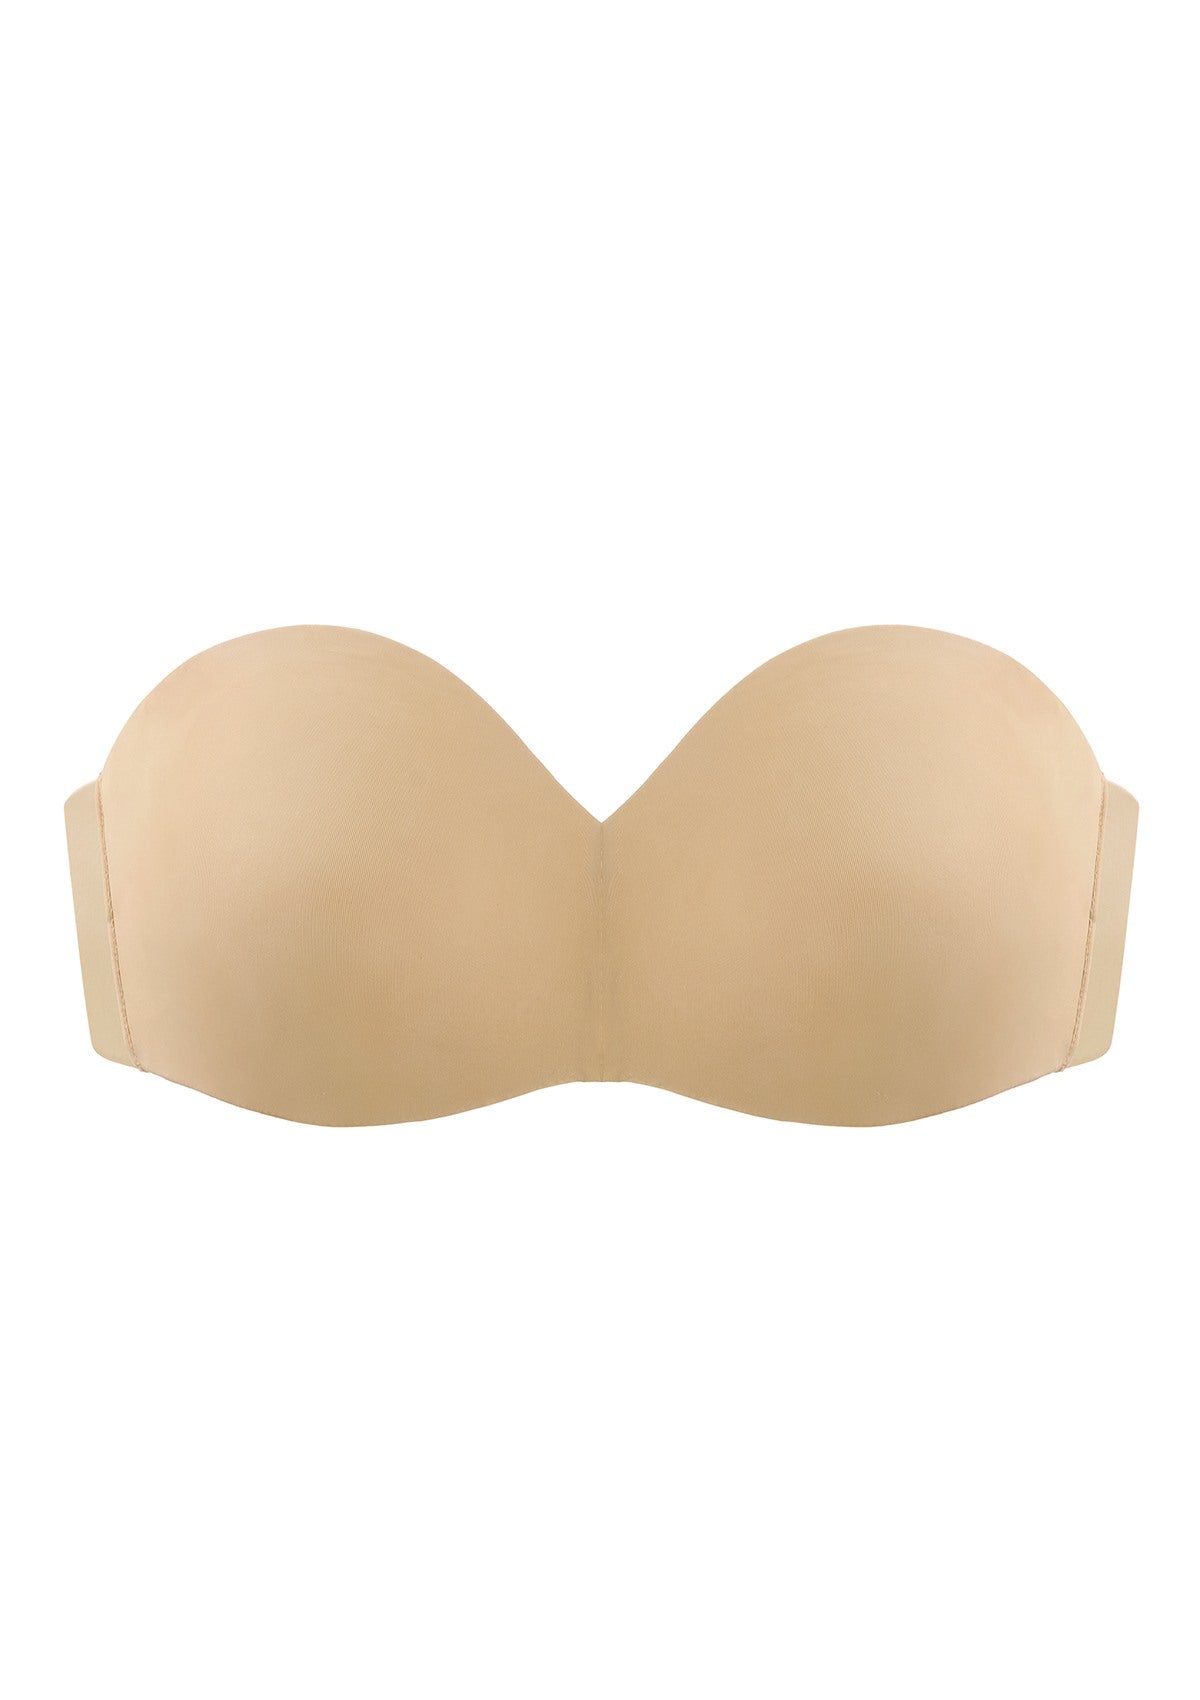 HSIA Shay Multiway Unlined Minimizer Underwire Strapless Bra - 34 / C / Caramel